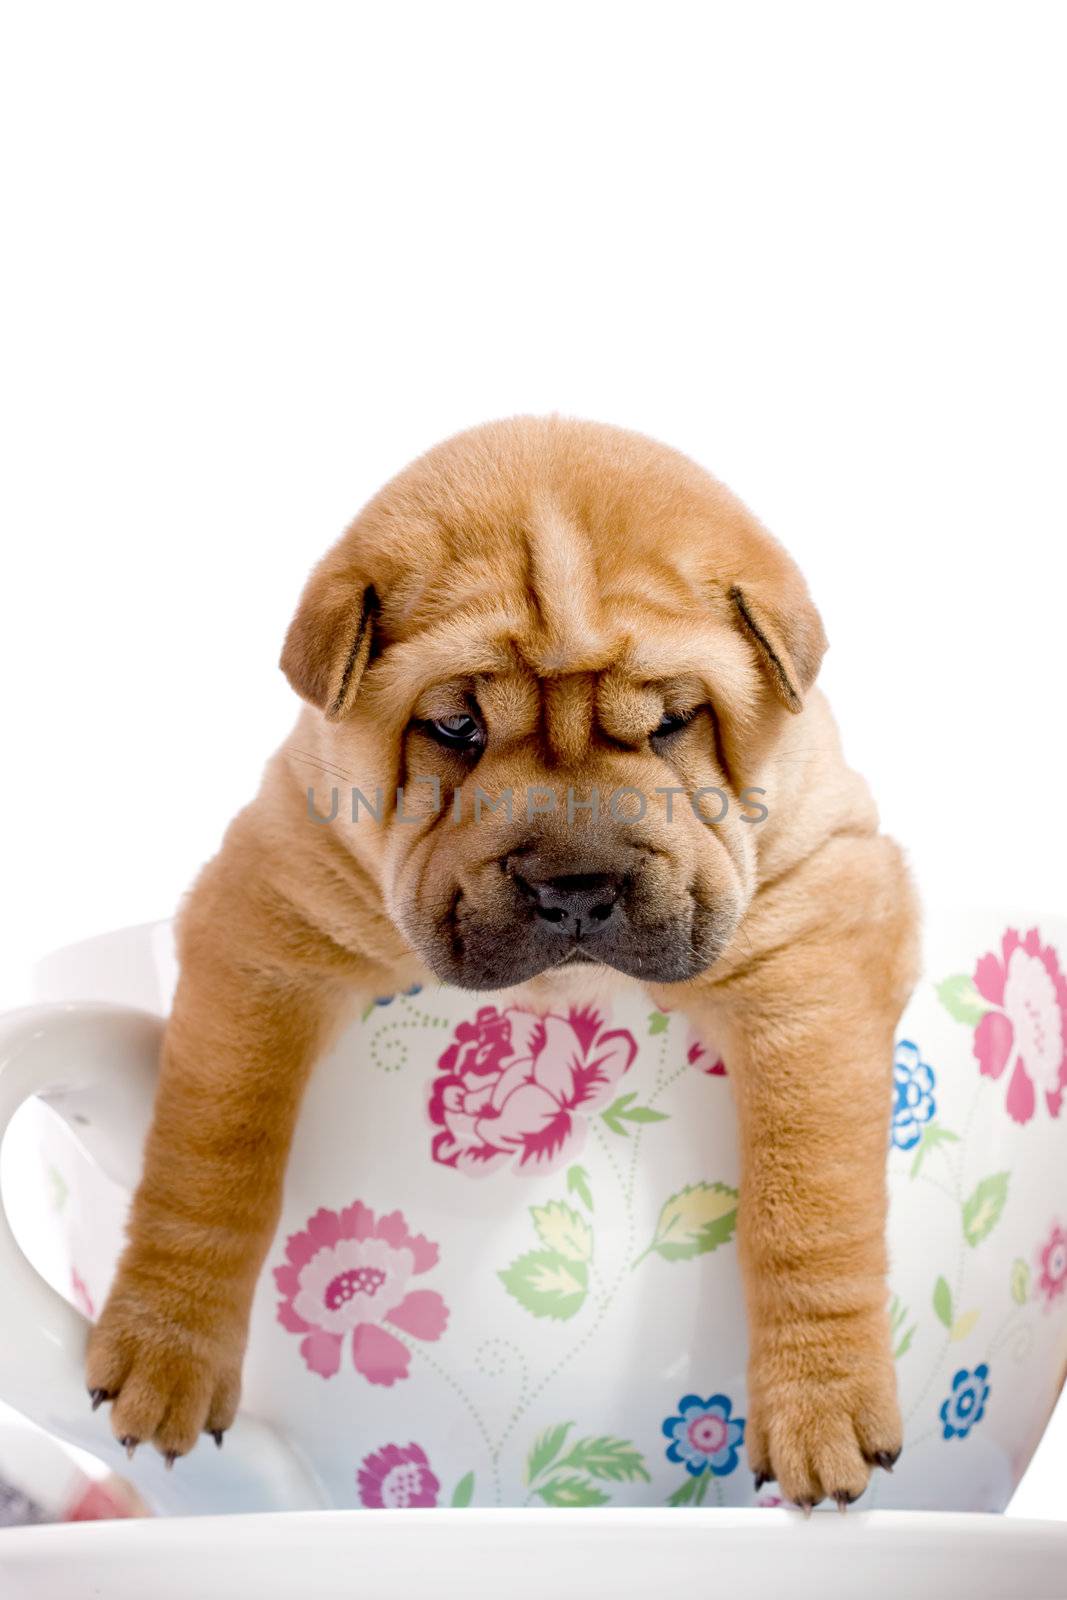 Shar Pei baby dog in a large cup by kokimk